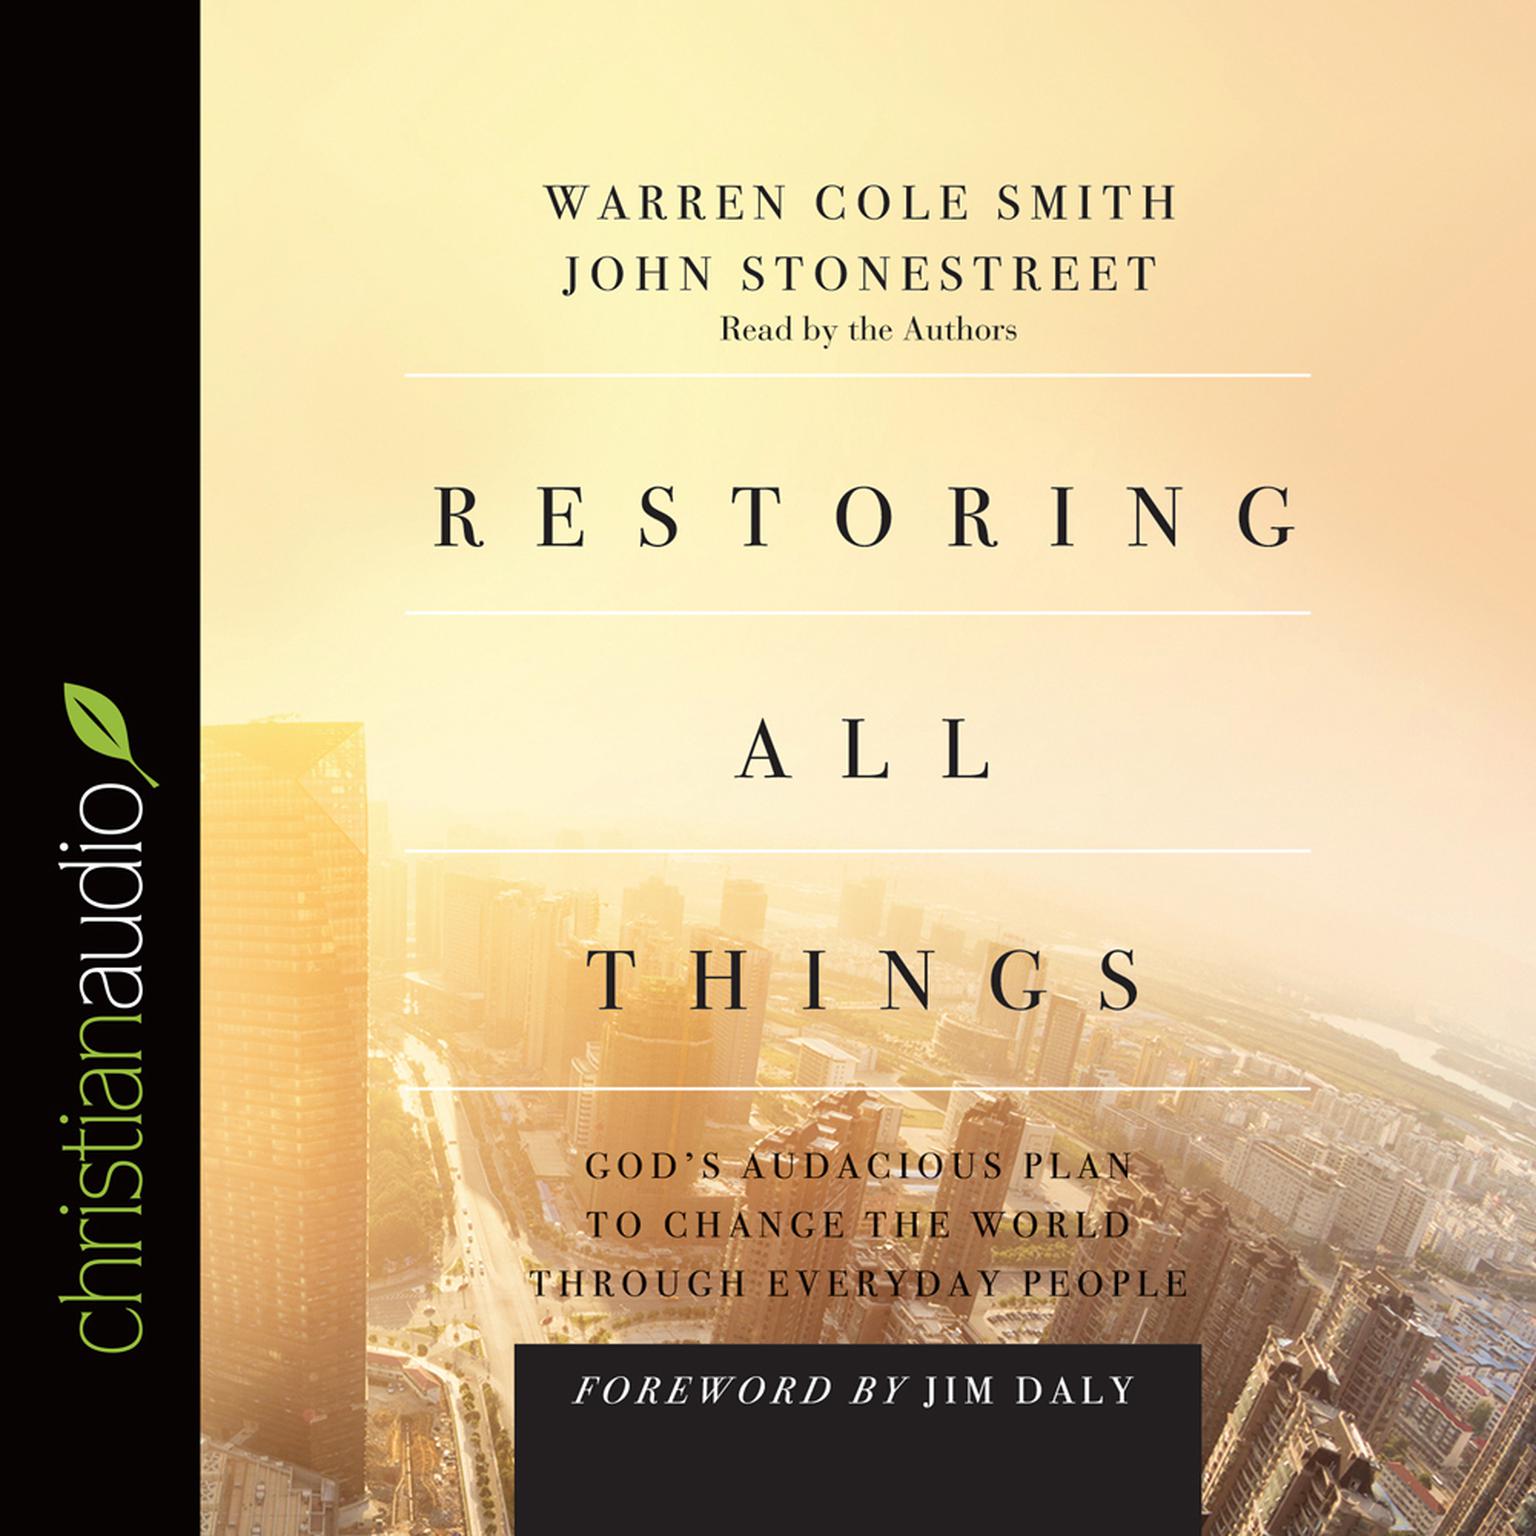 Restoring All Things: Gods Audacious Plan to Change the World through Everyday People Audiobook, by John Stonestreet